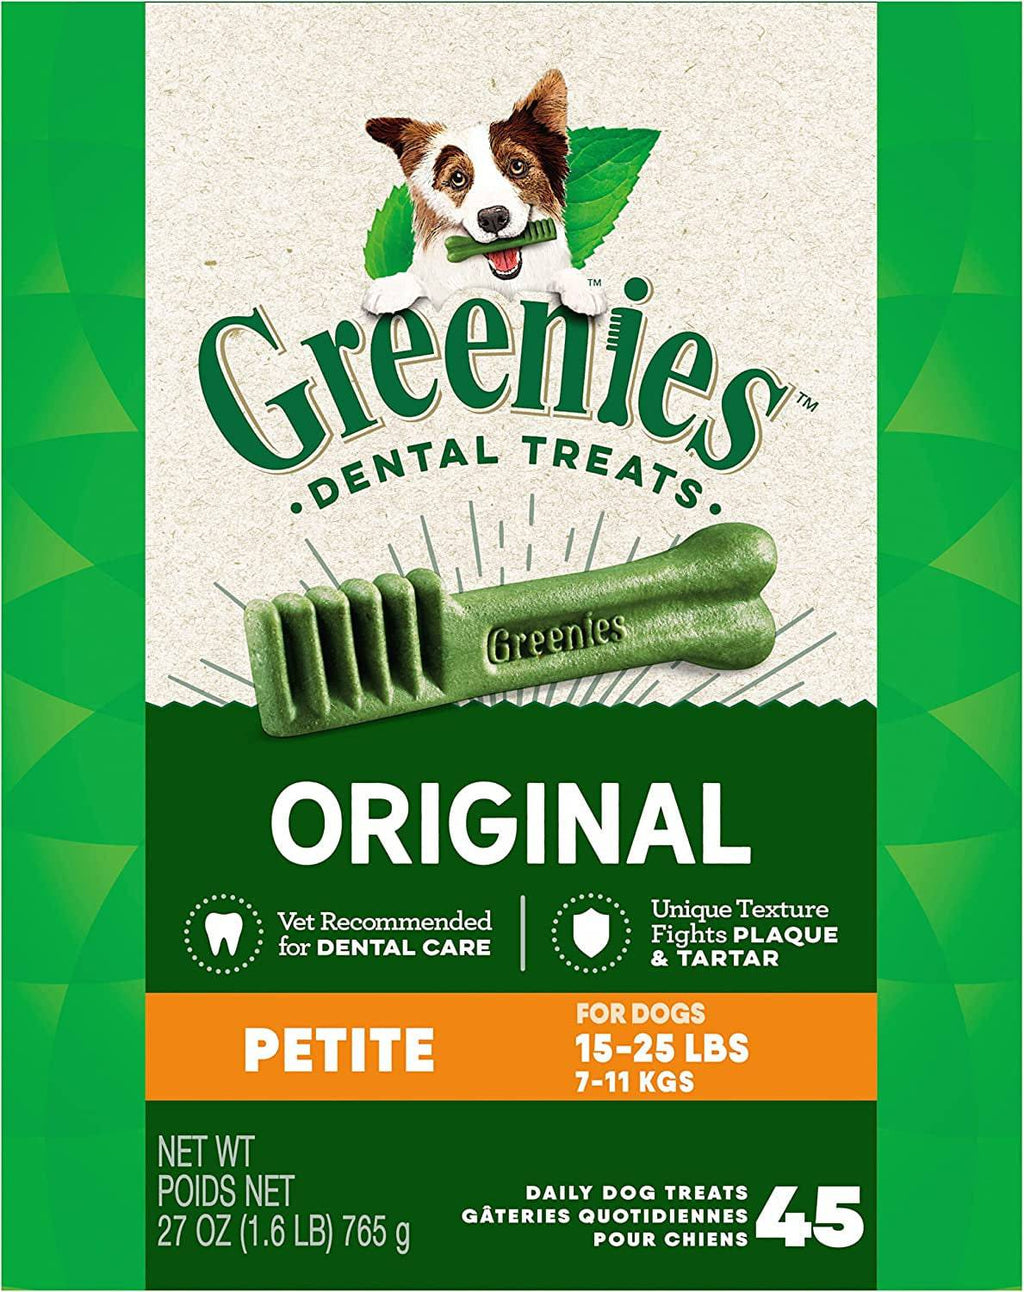 GREENIES Original Petite Natural Dog Dental Care Chews - Felicitails is founded by Lindsay Giguiere